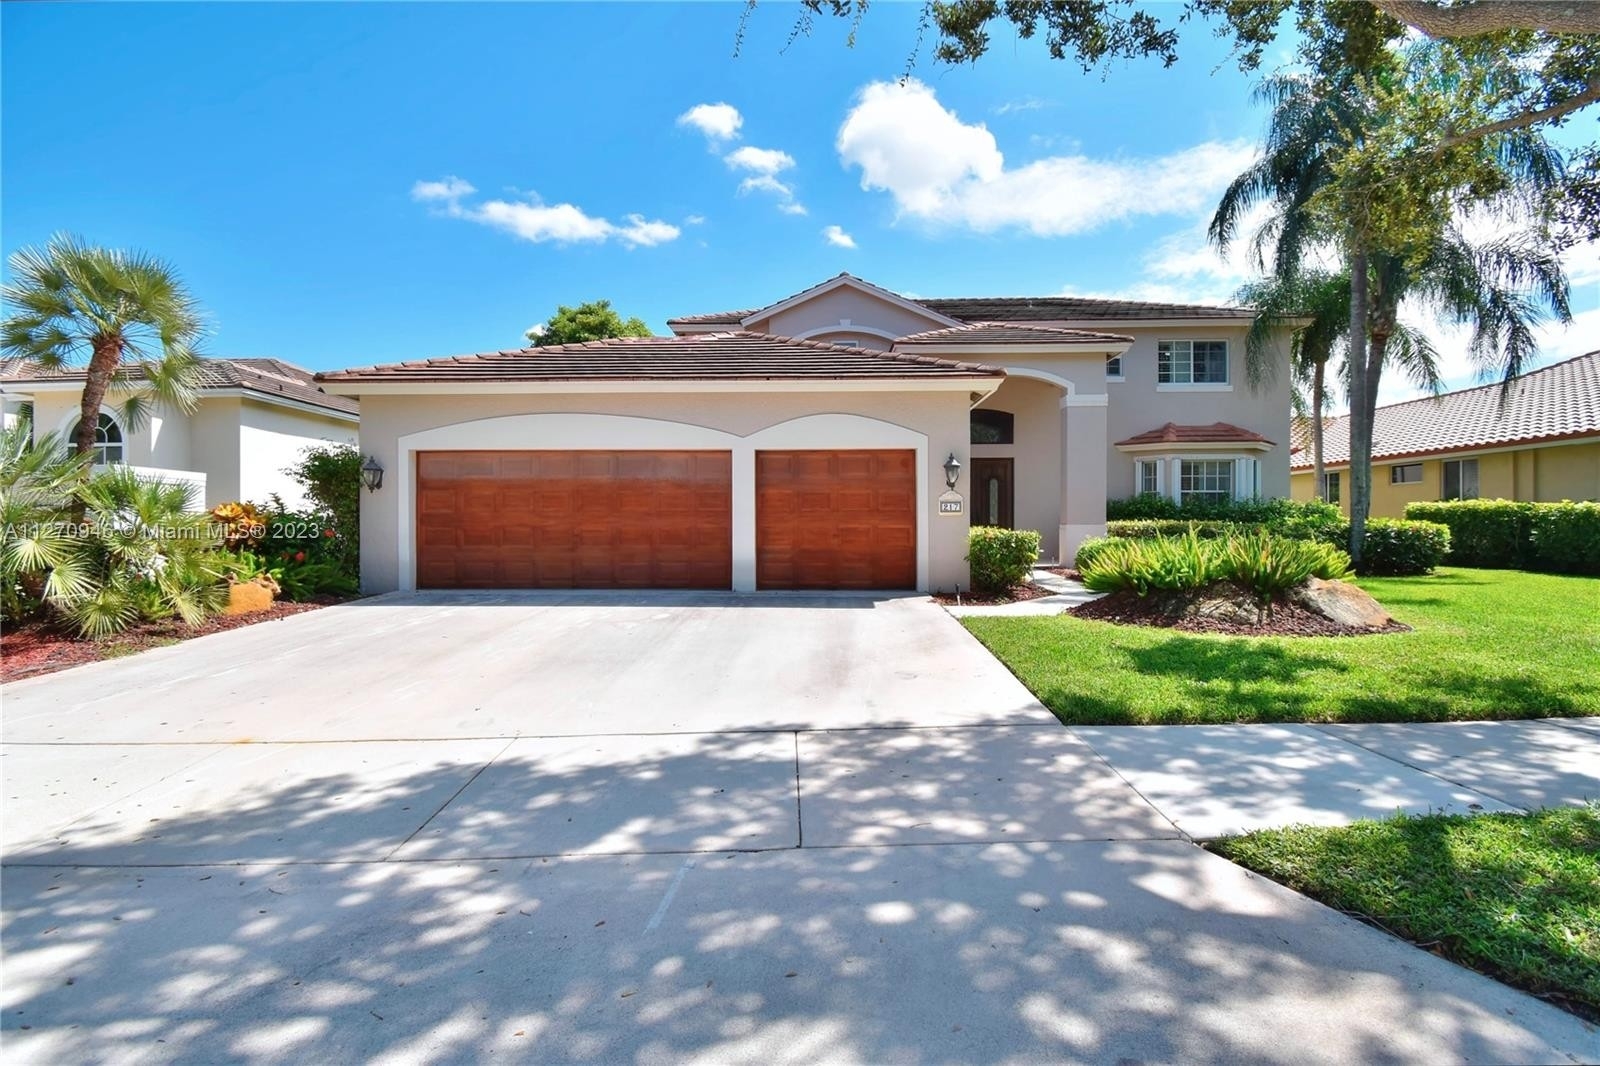 Single Family Home for Sale at Weston, FL 33327